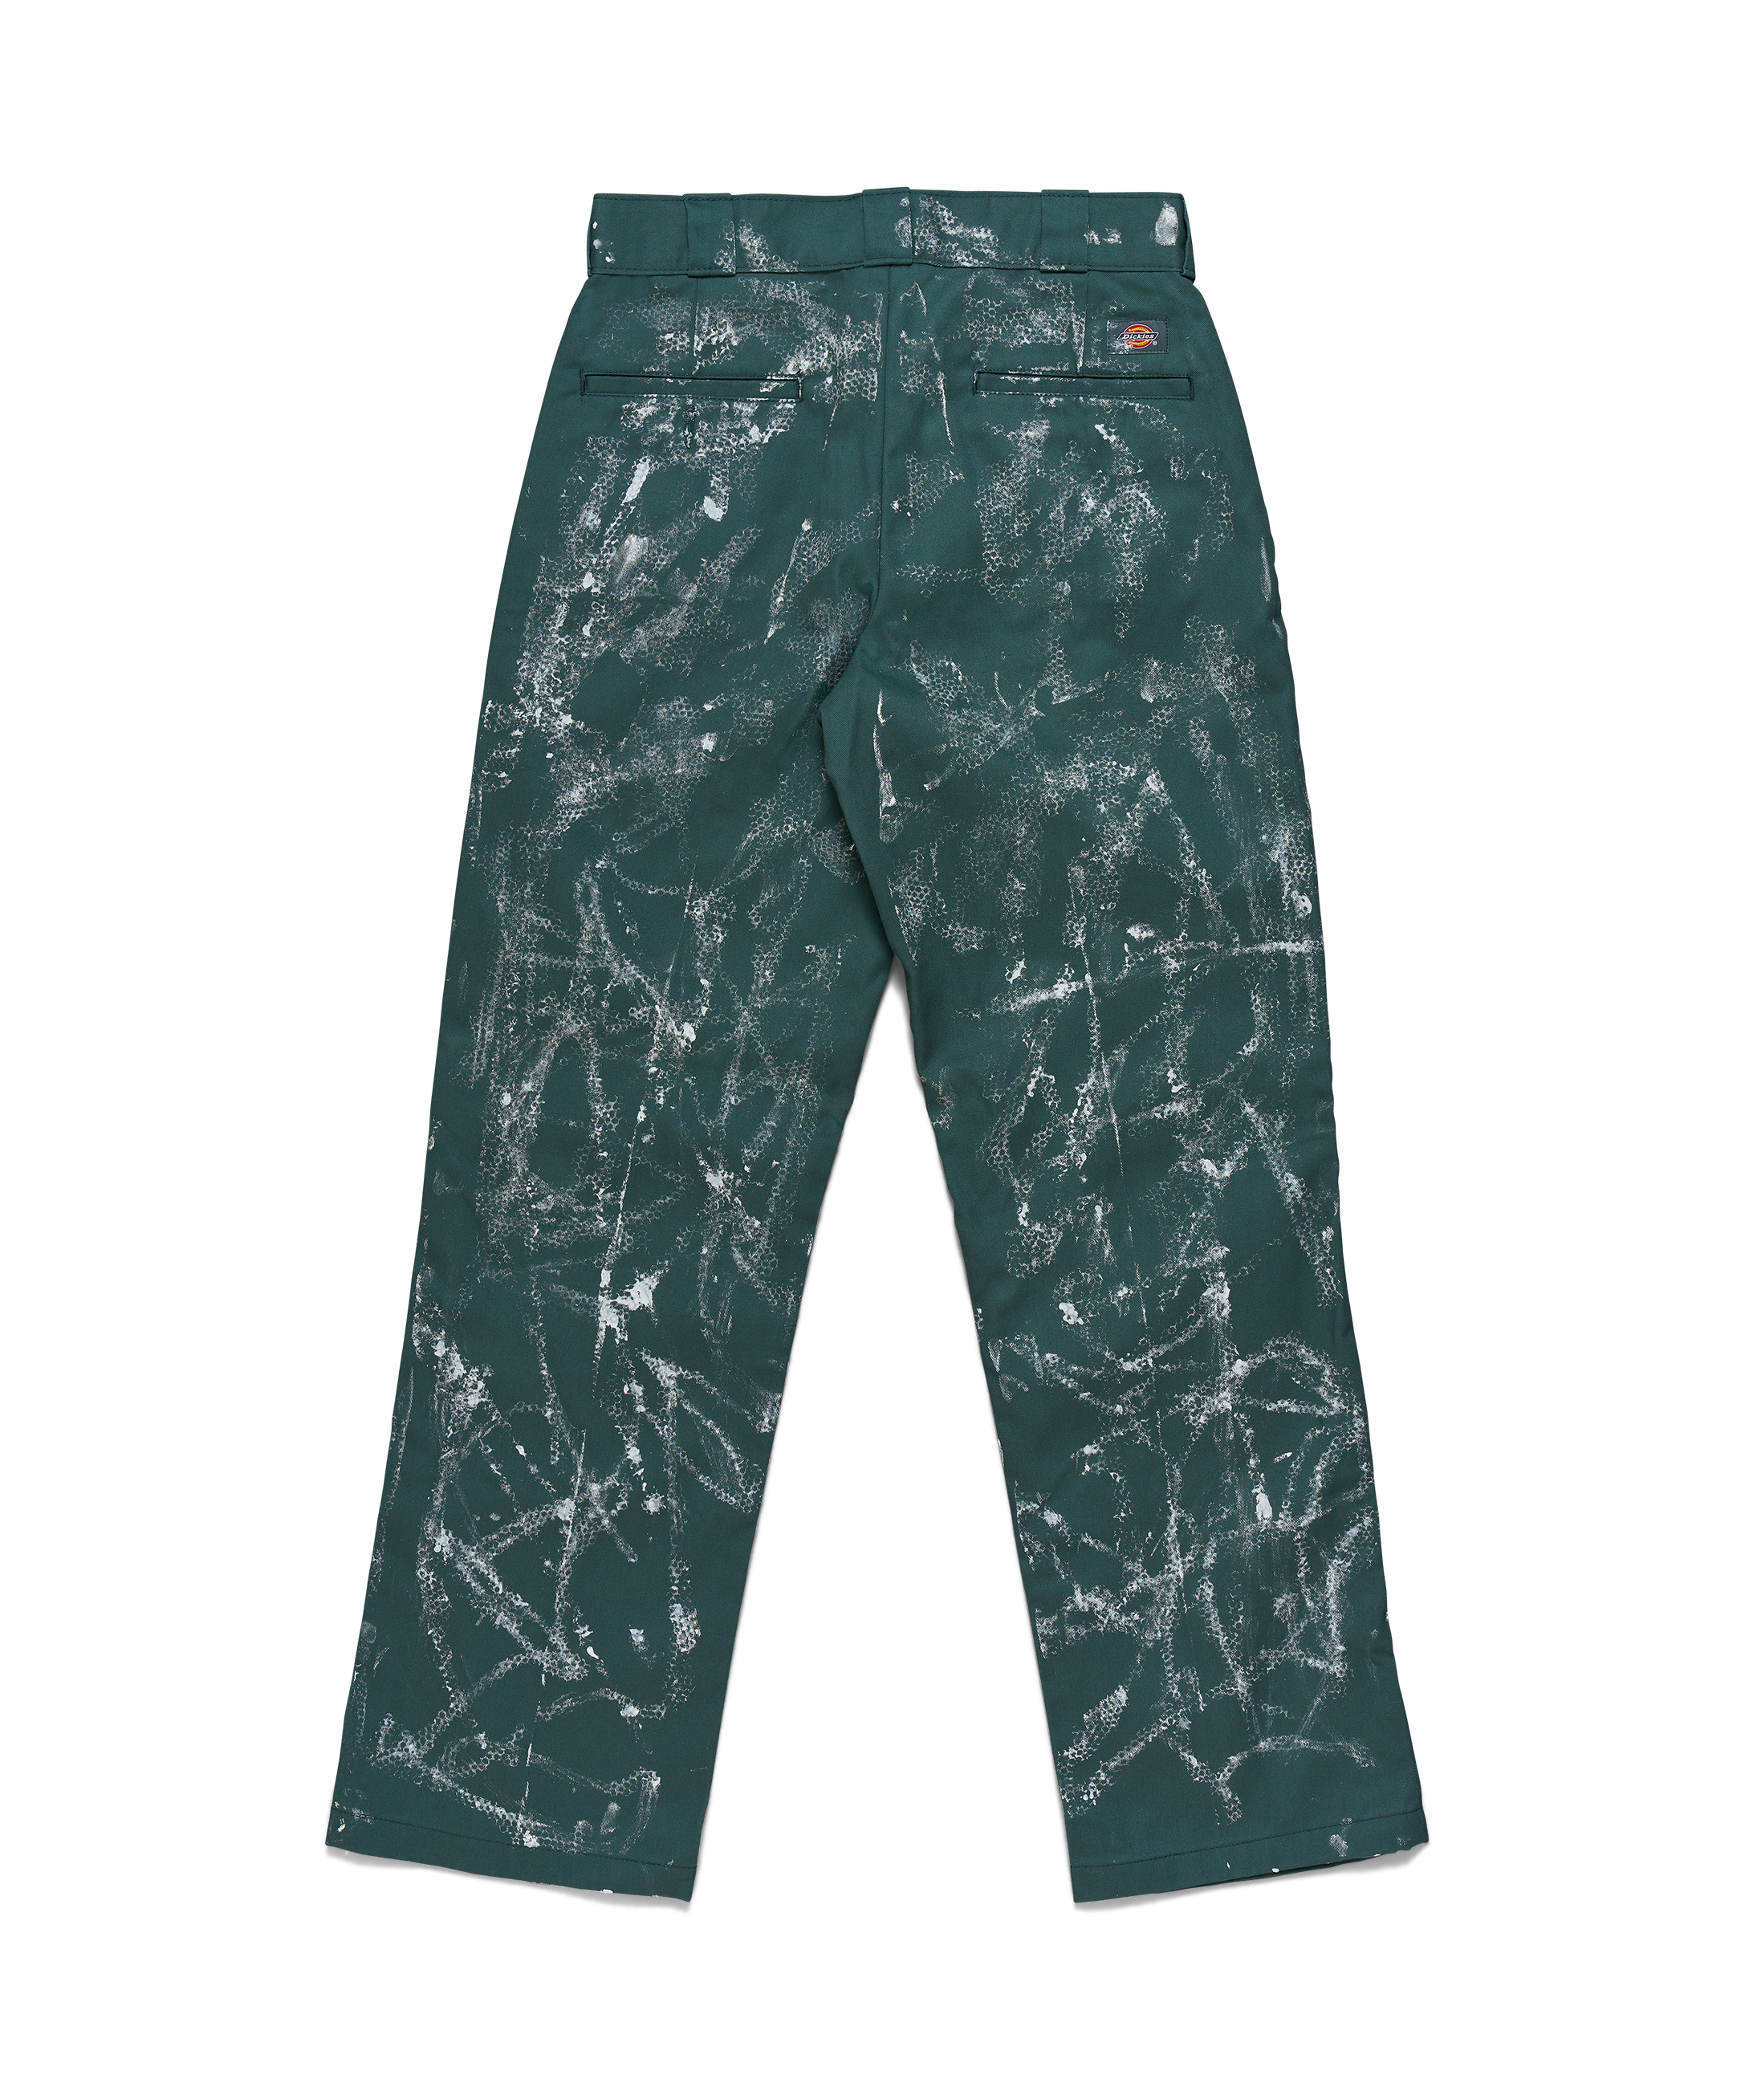 Lincoln Green Rolling Putts 874® Pants - Whim Dickies